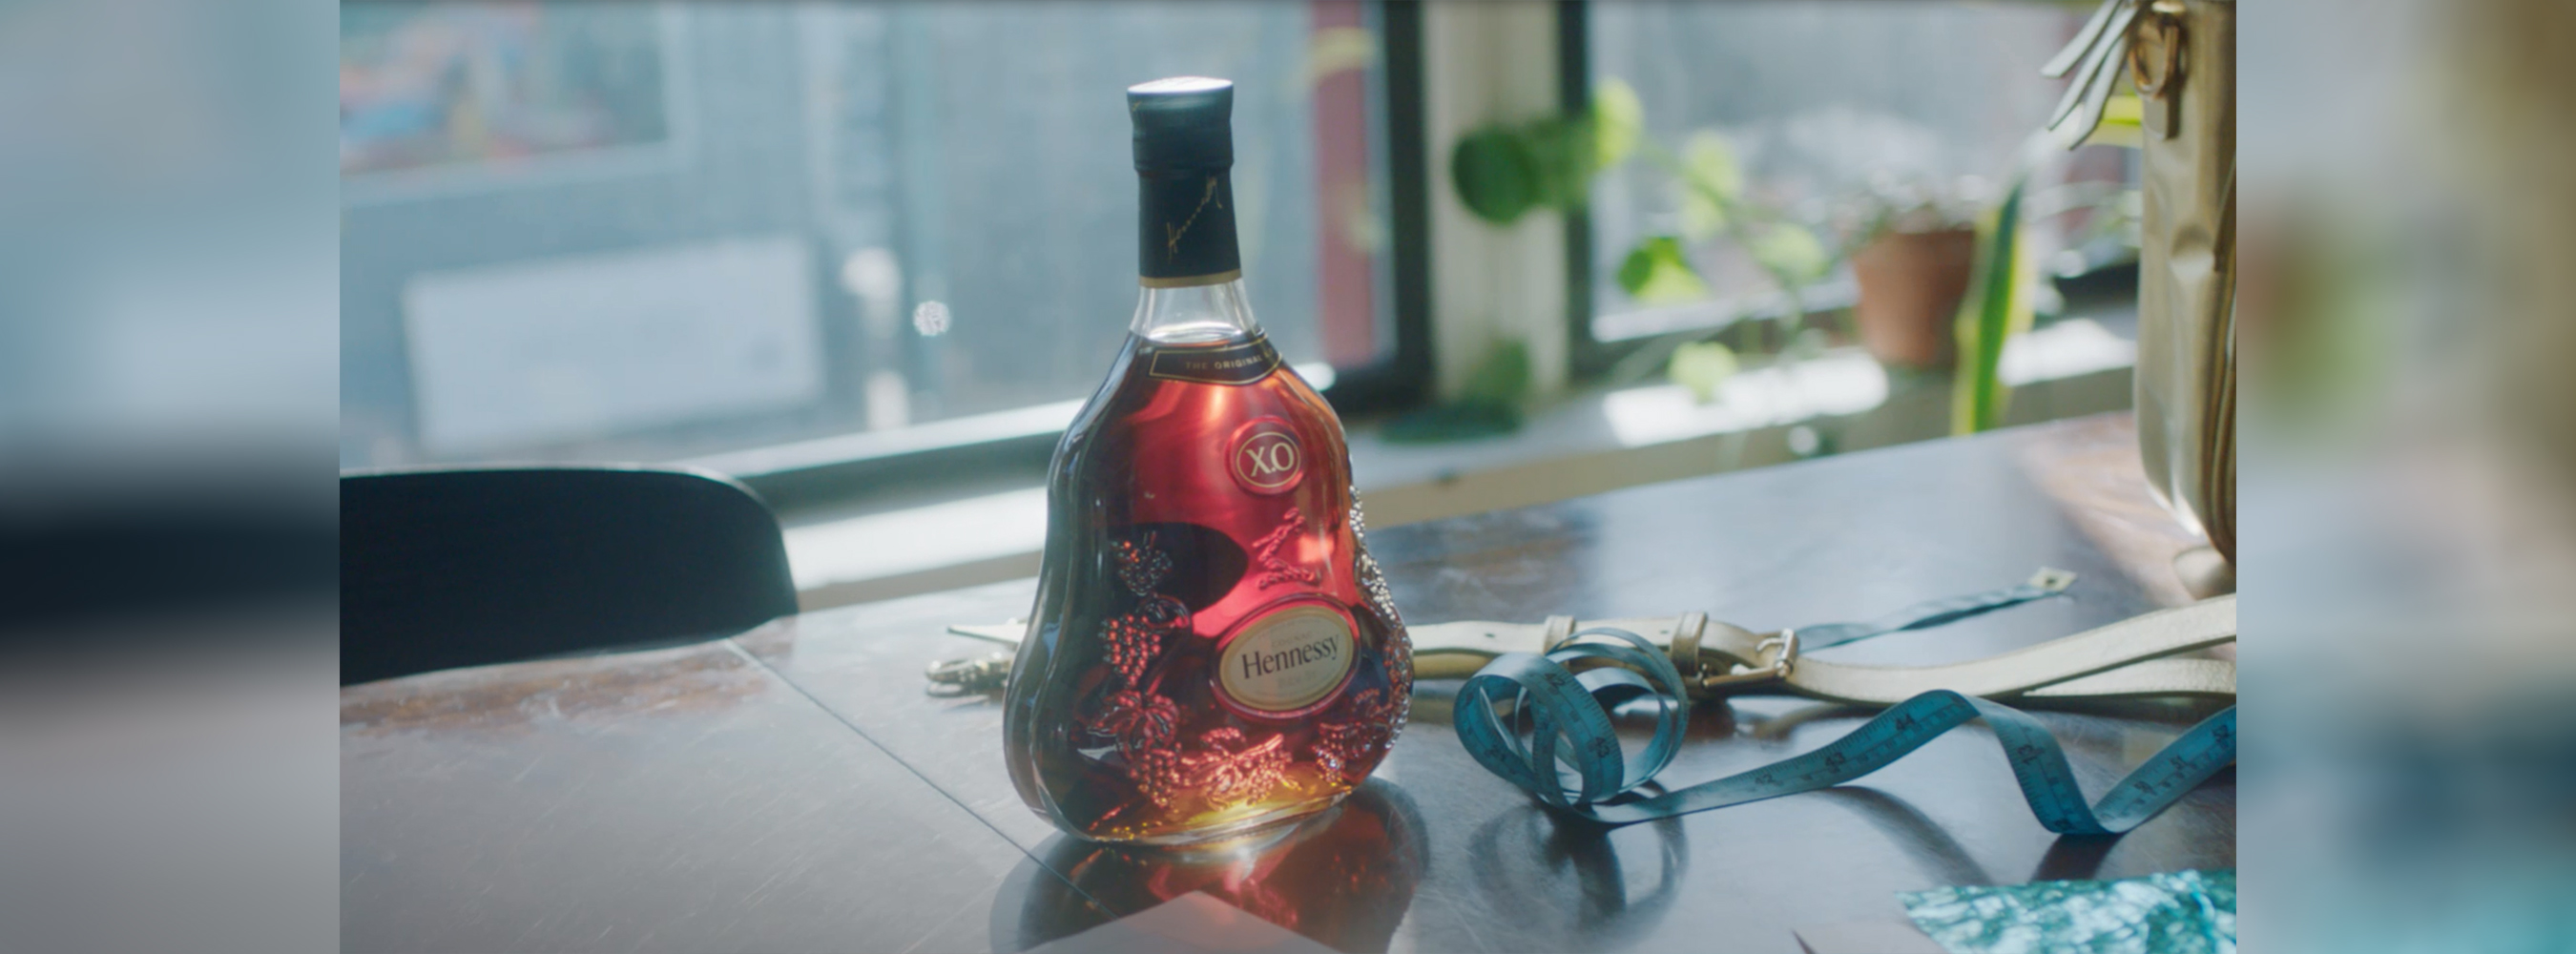 The H3NSY Community Will Get To Co-Create Hennessy's New Bottle